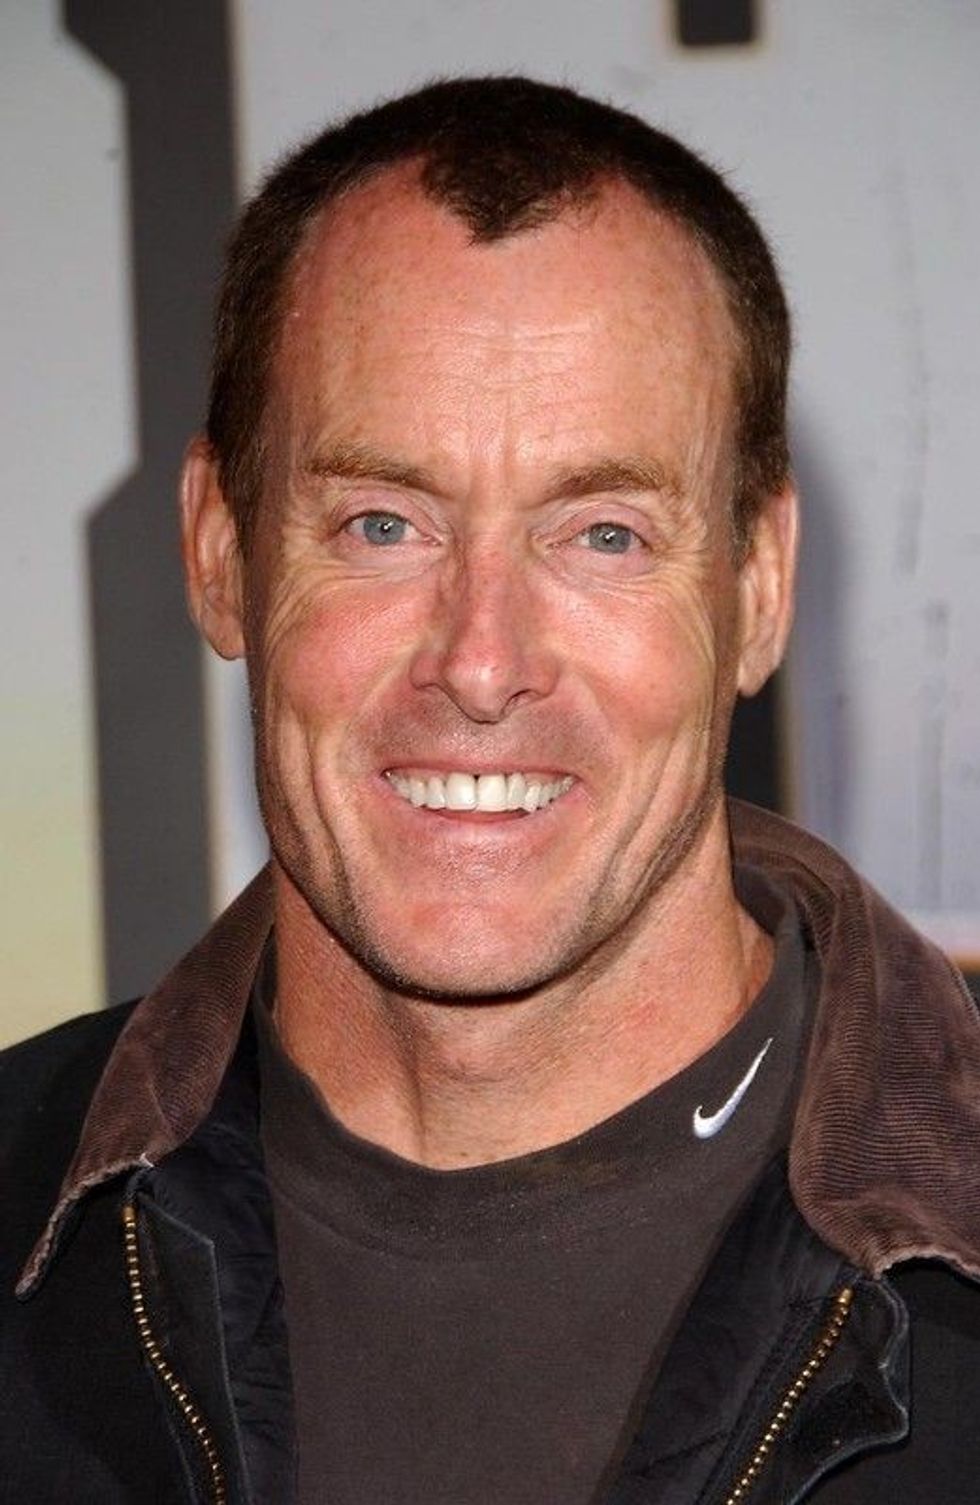 Discover lots of interesting facts you might not know about the actor John C. McGinley.